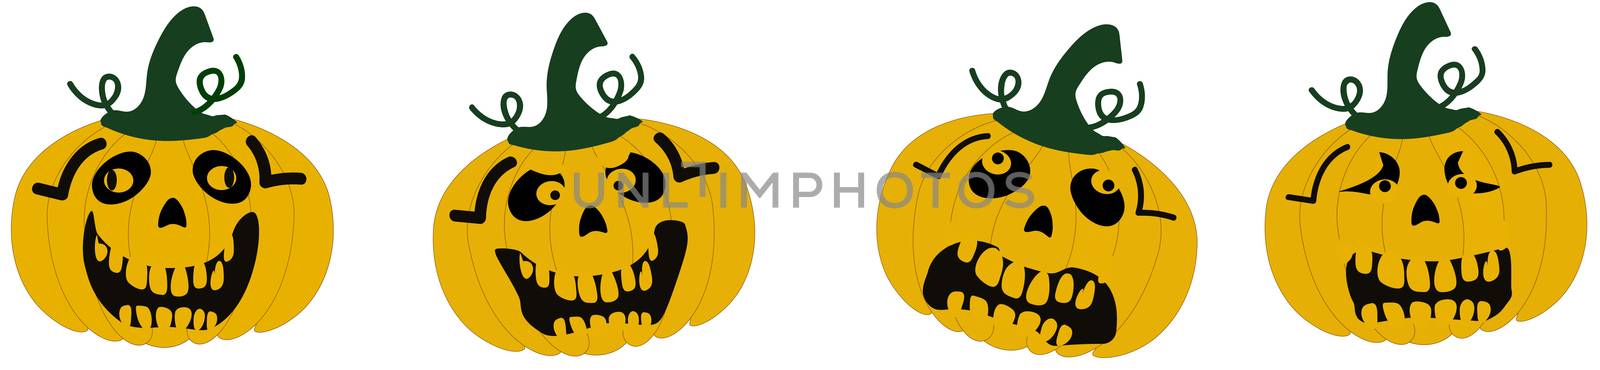 Illustration for halloween cards and web banners. With copy space by PeterHofstetter